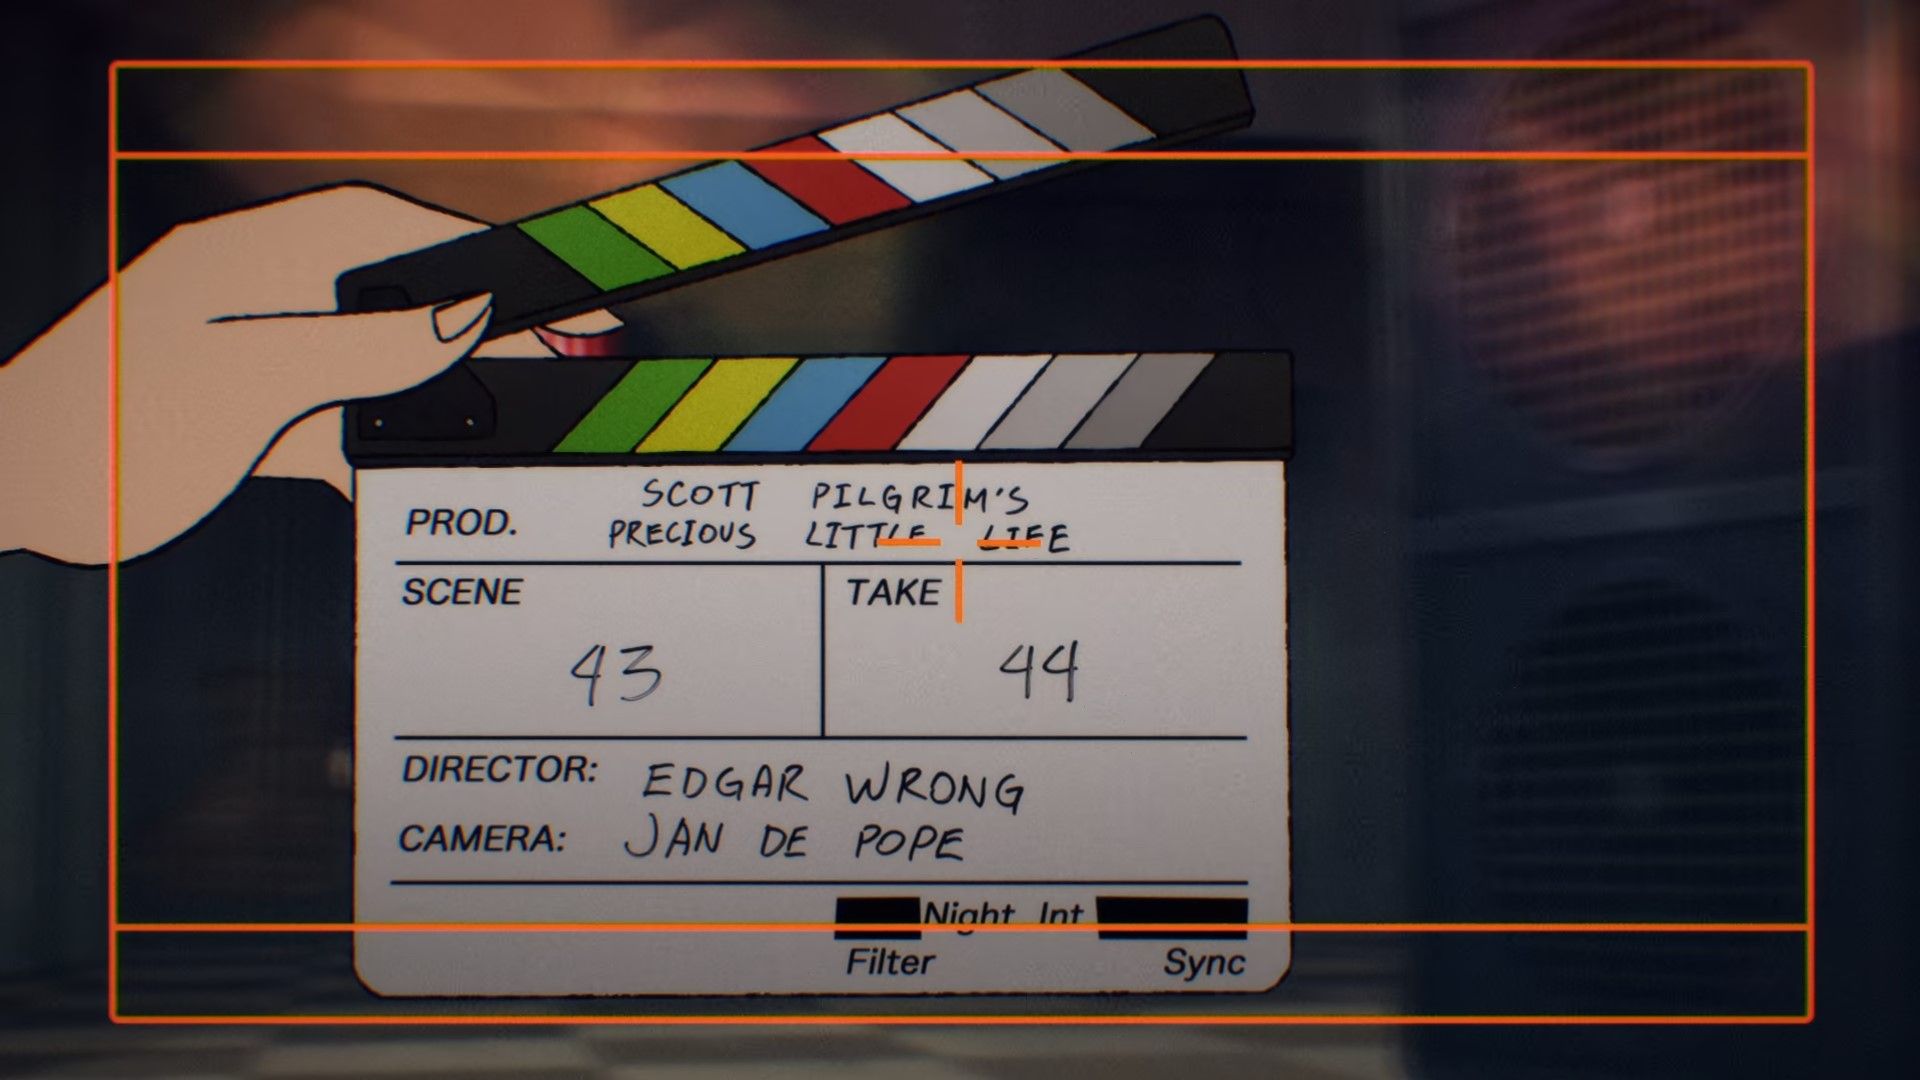 Screenshot from Scott Pilgrim Takes Off episode 5 shows a movie slate with director Edgar Wrong and Camera operator as Jan De Pope.